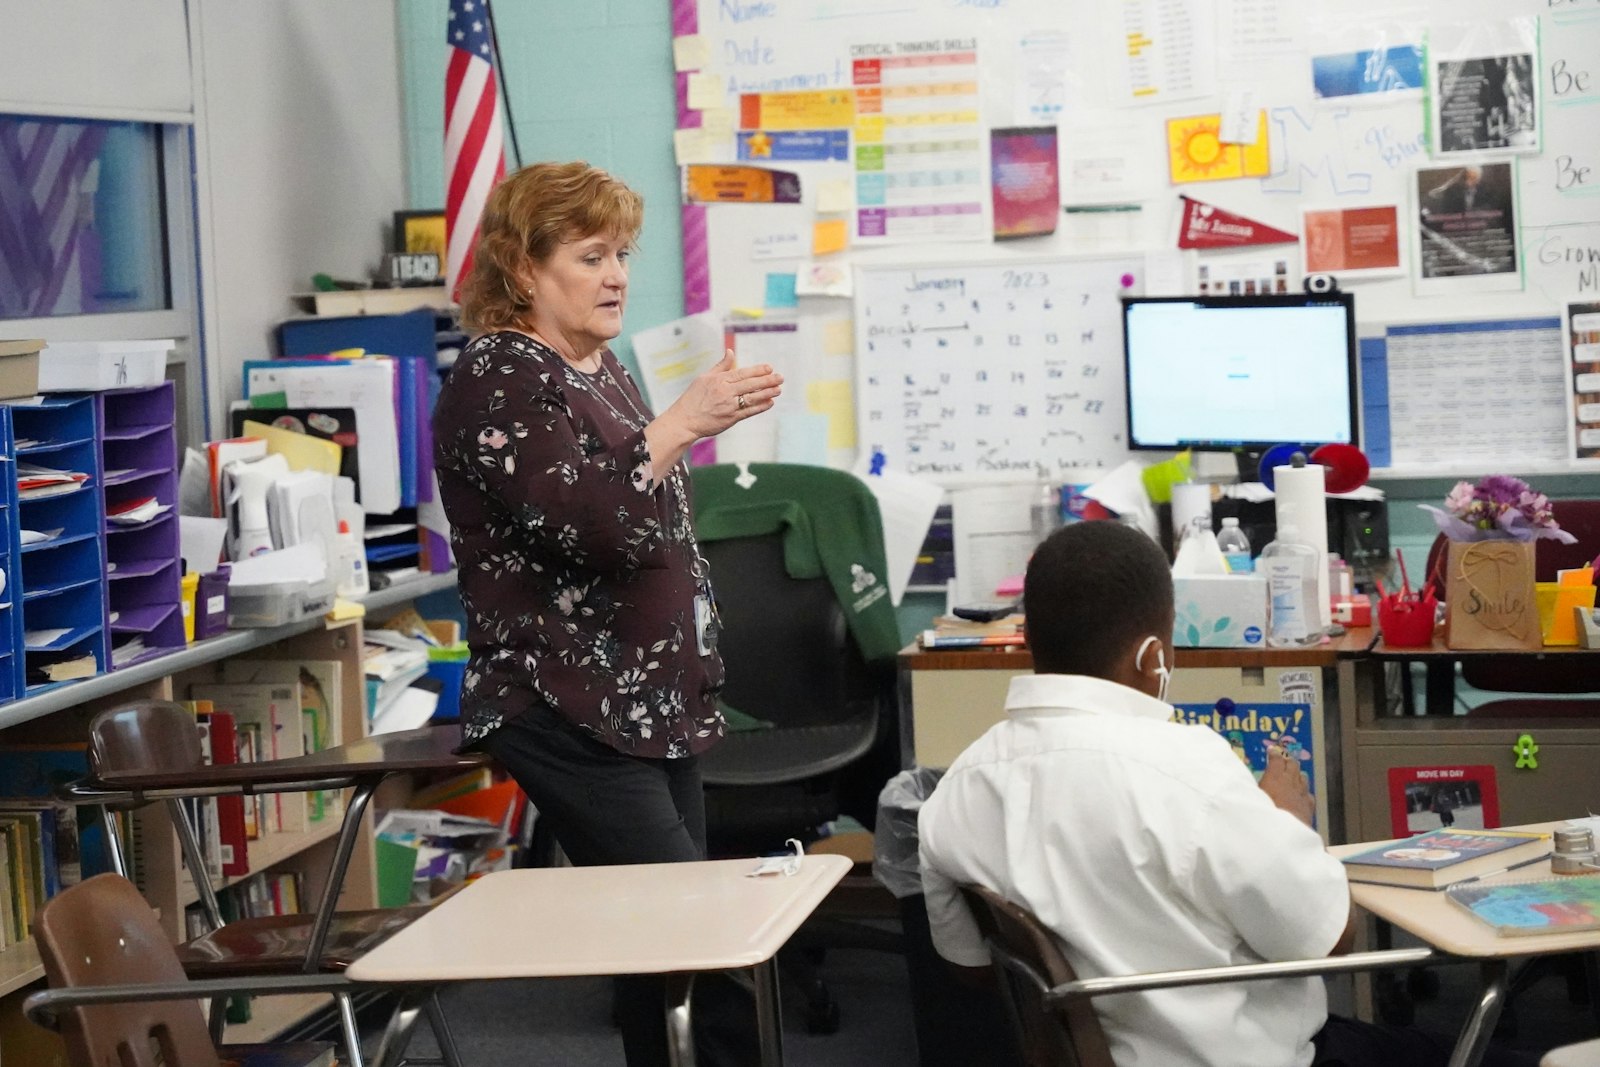 Lynn O'Meara leads her class at Most Holy Trinity School in Detroit in a lesson after reciting the Pledge of Allegiance. O'Meara, who spent 35 years in the Harper Woods school district, decided to pursue a second career in Catholic education after the pandemic, in part due to the flexibility her public school pension afforded her. (Daniel Meloy | Detroit Catholic)